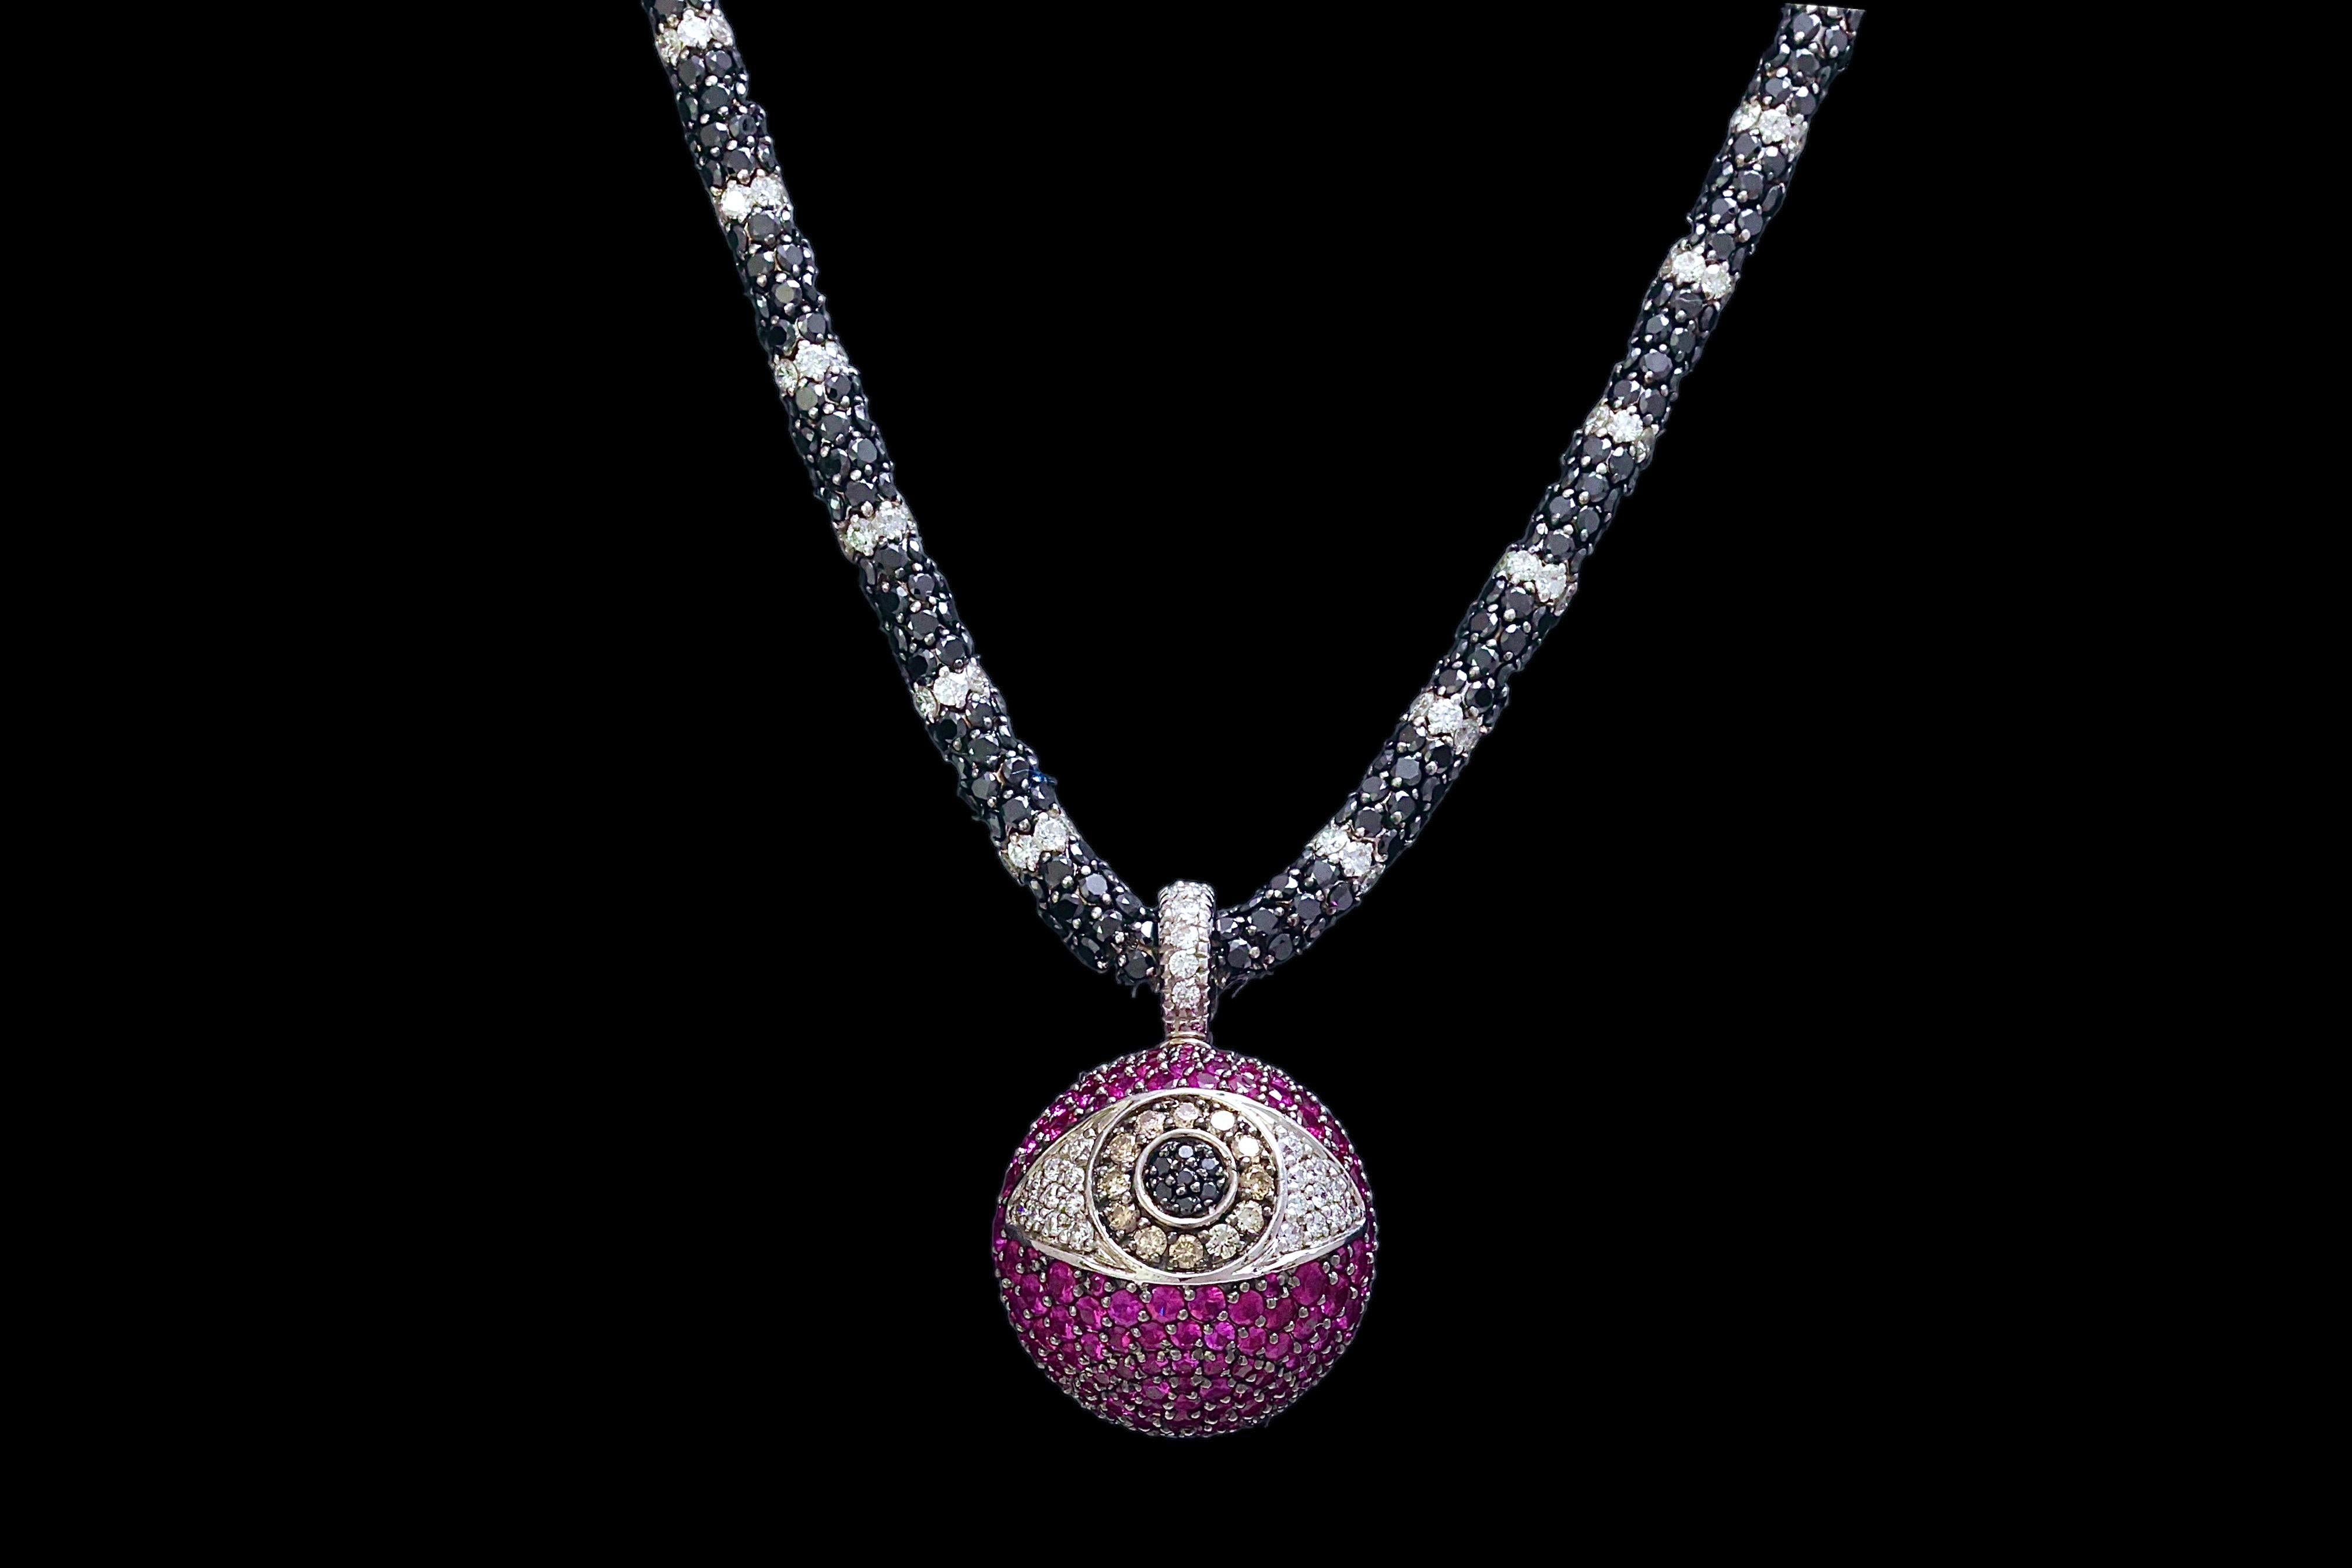 18 Kt Gold Necklace & Pendant With 30 ct. Black & White Diamonds & Rubies For Sale 1